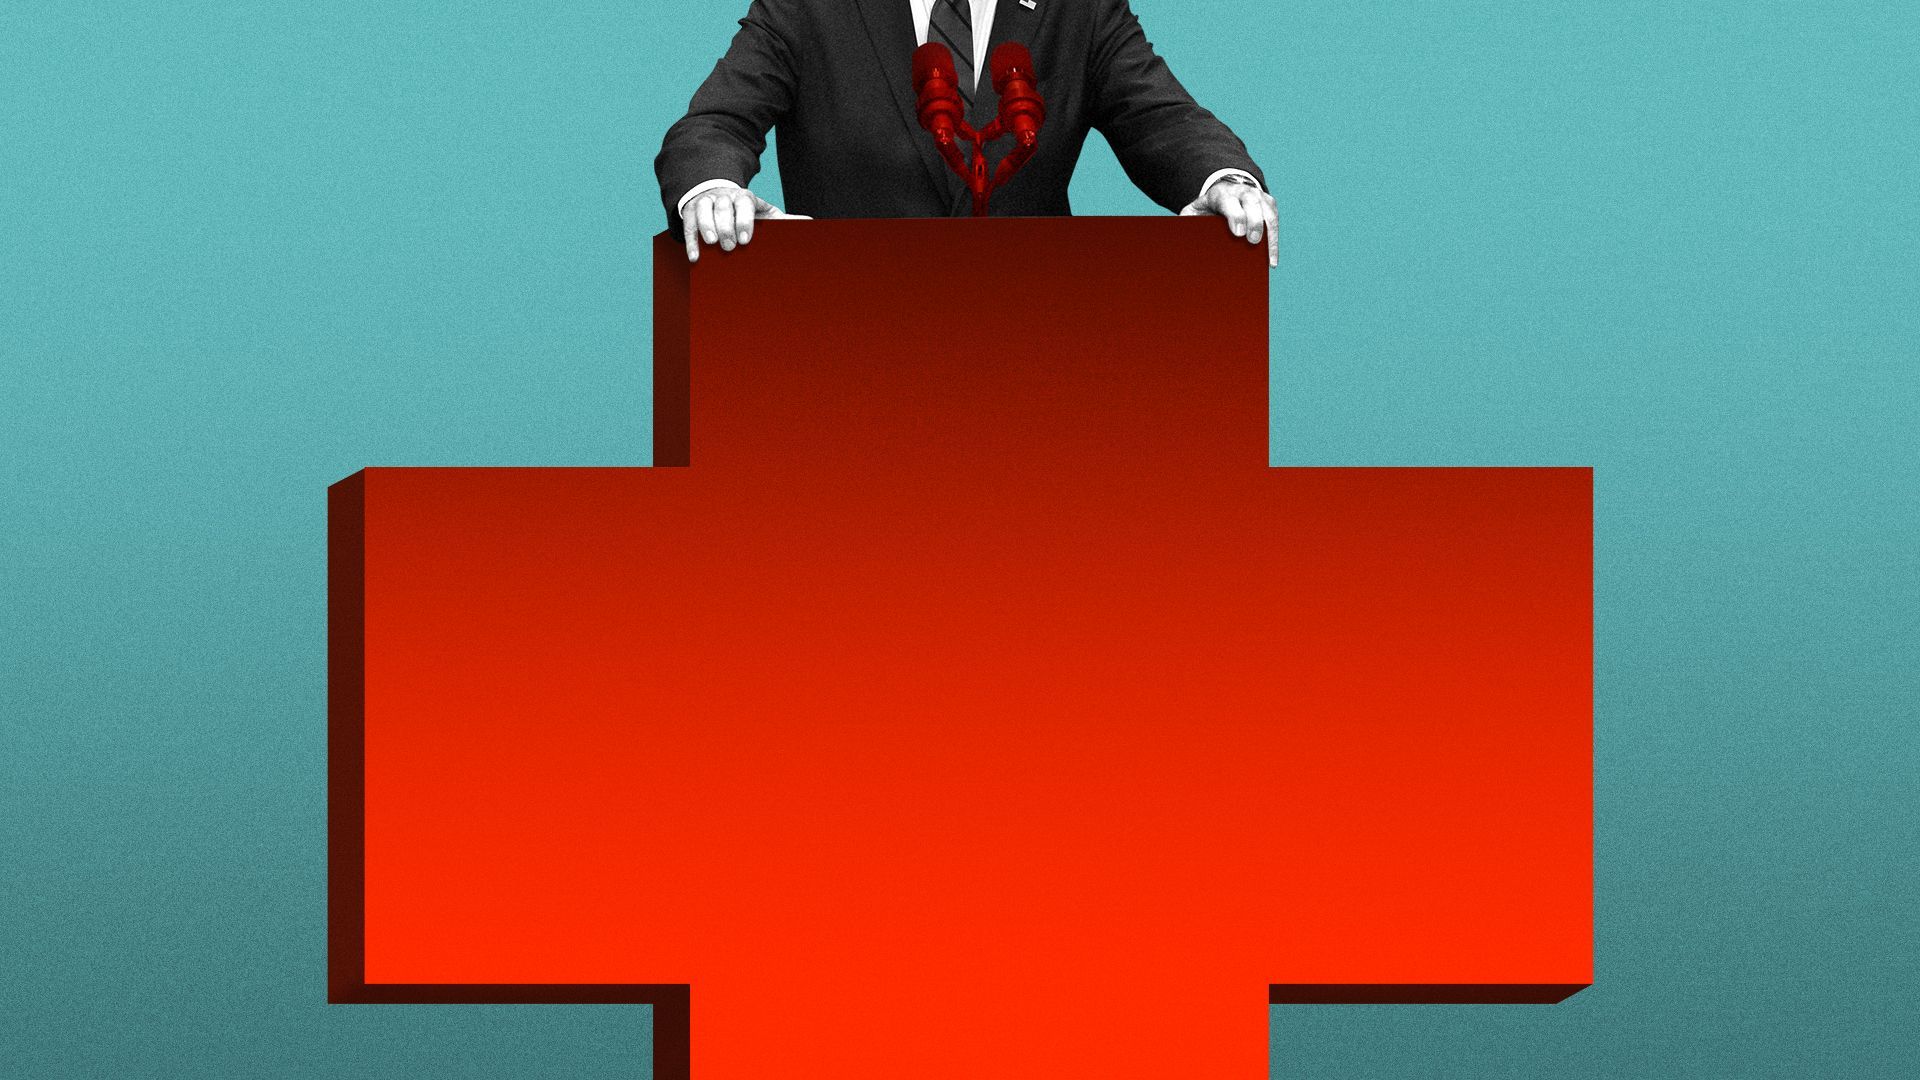 Photo illustration of President Biden speaking from a podium made of the red cross symbol.